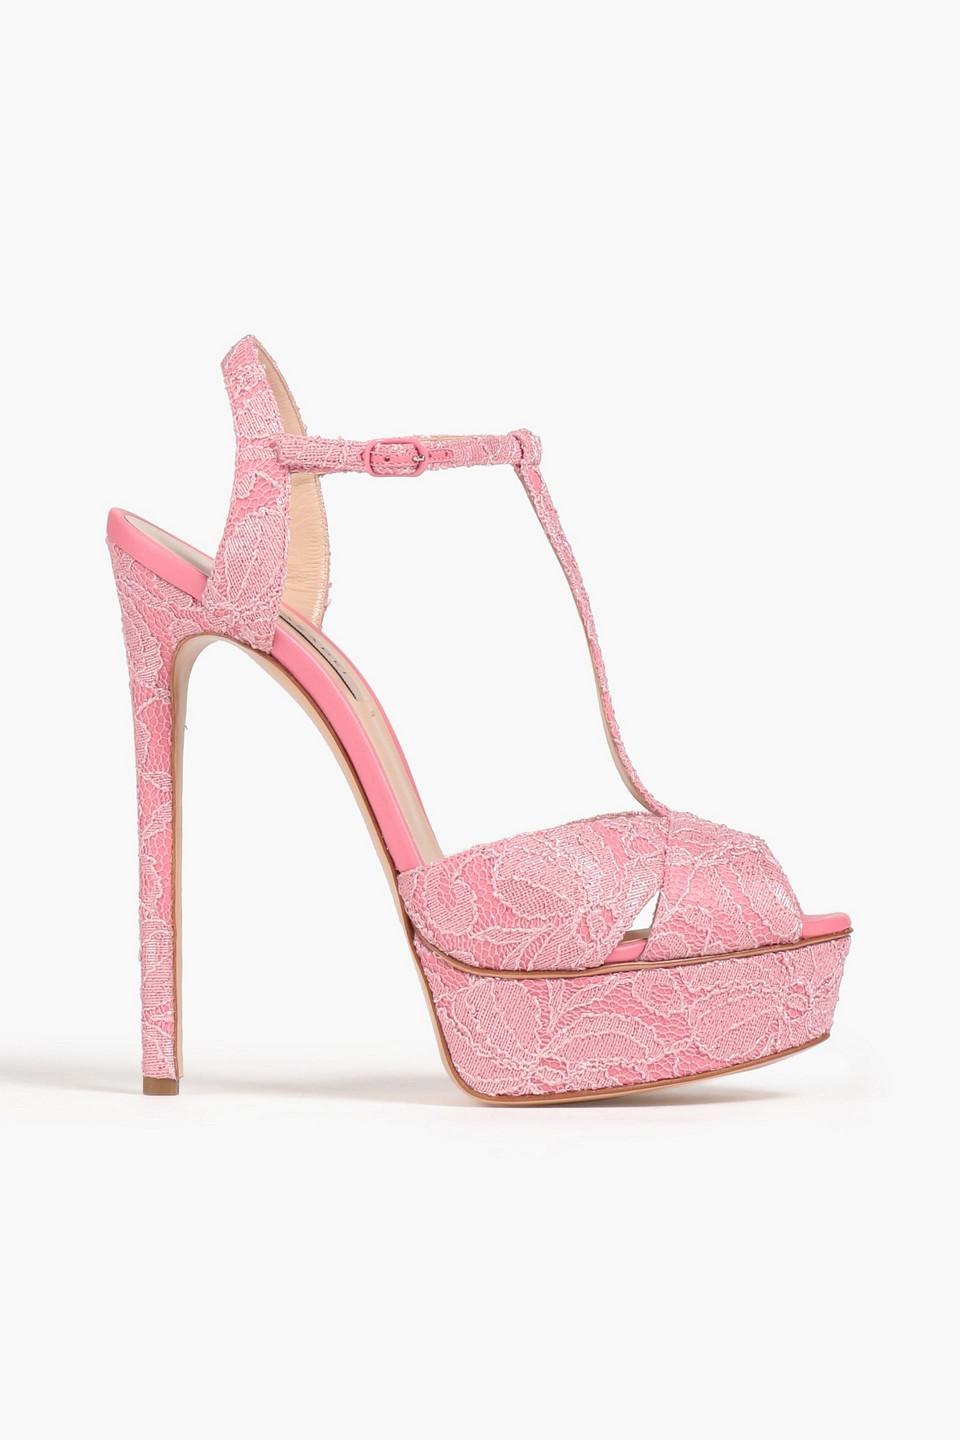 Casadei Chantal Corded Lace And Leather Platform Sandals in Pink | Lyst